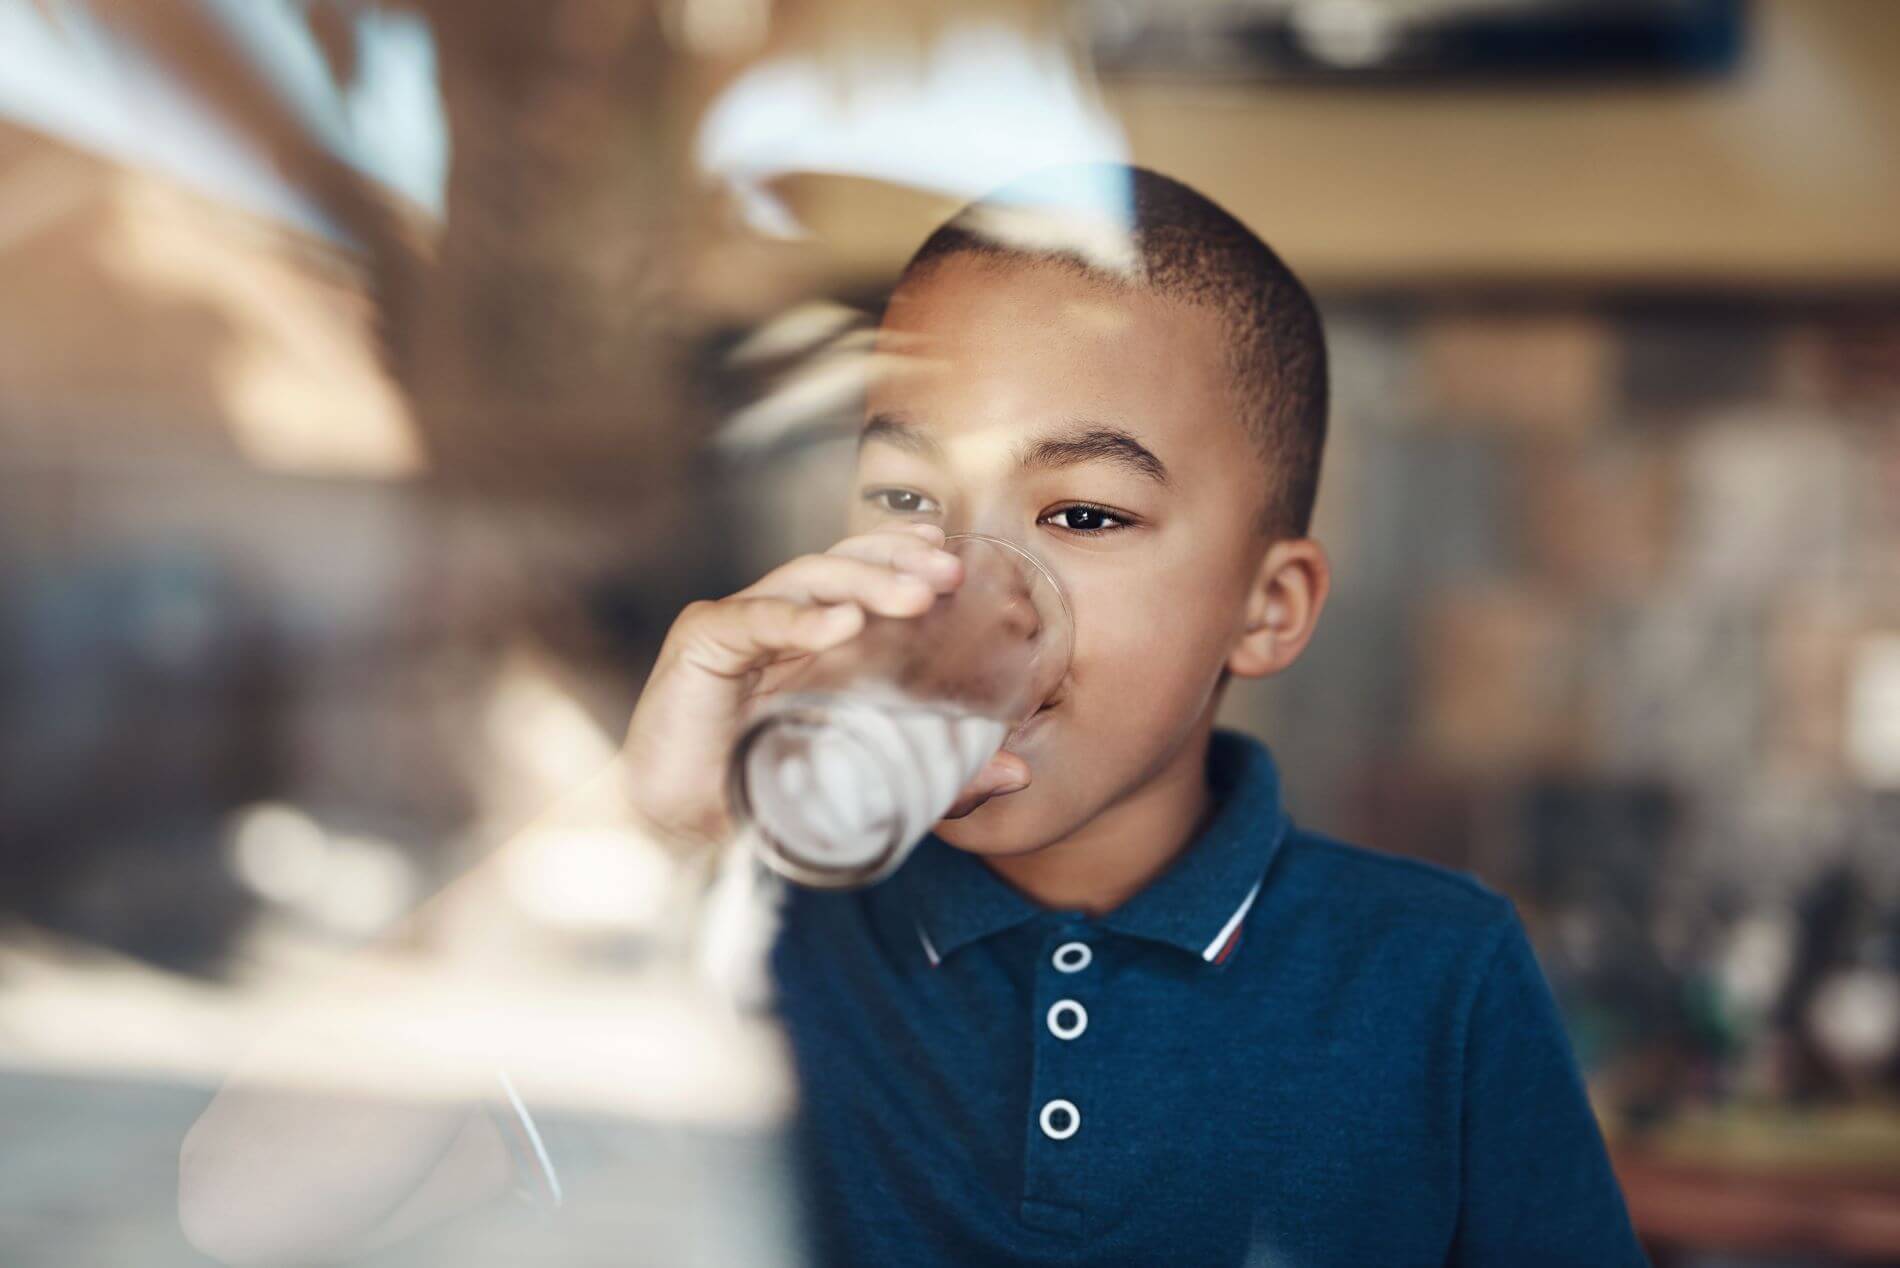 Child drinking cup of water by a window.